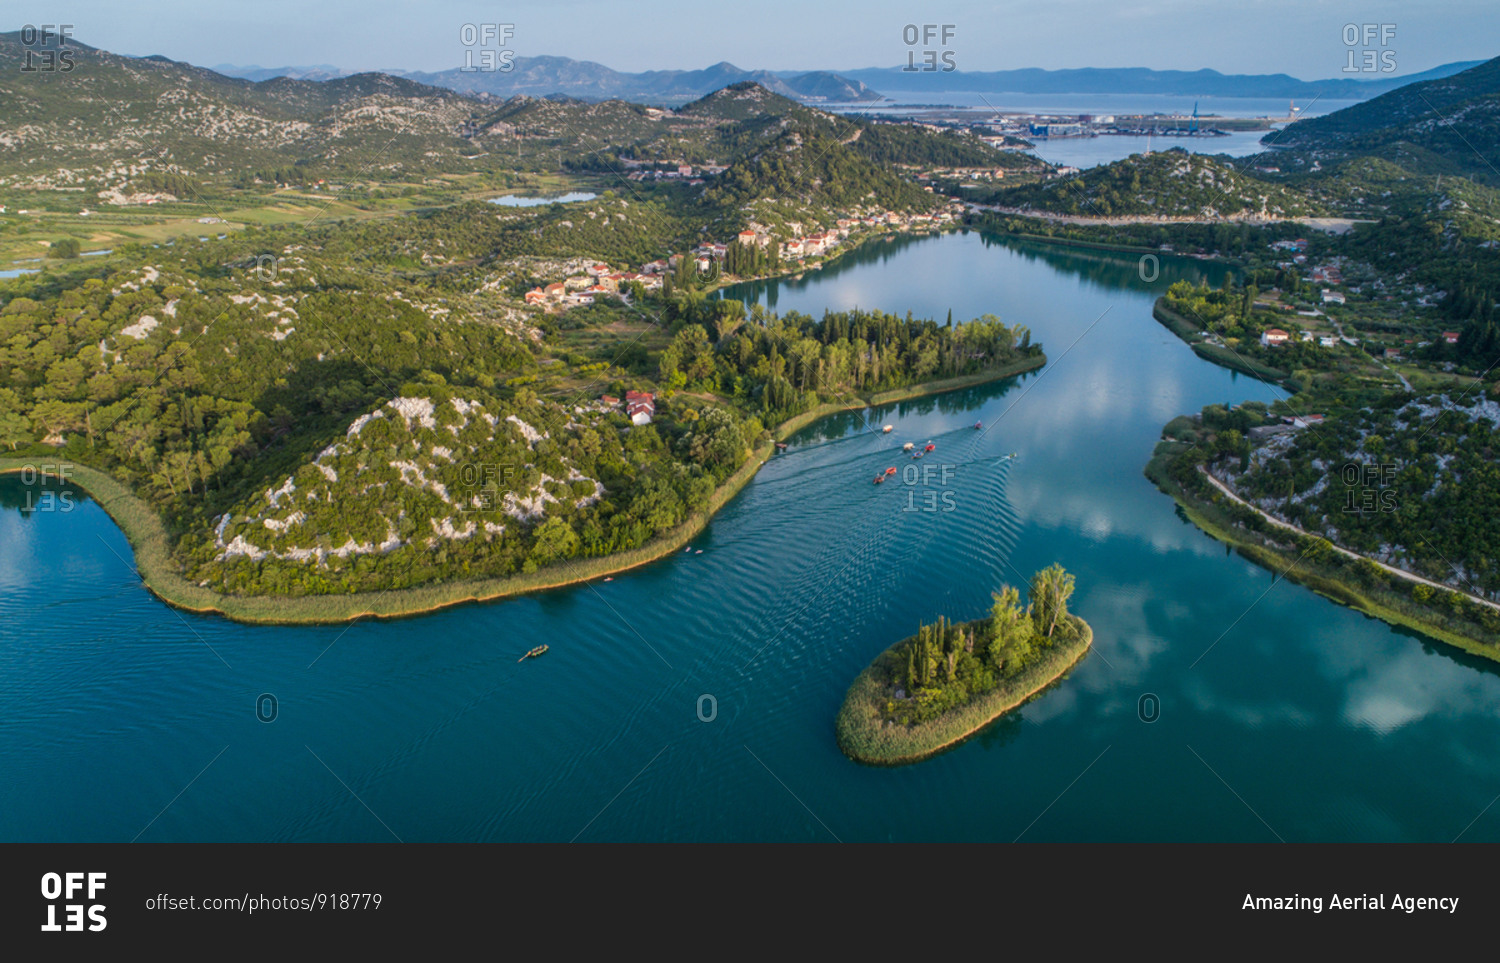 Aerial view of boats during the traditional boat race on Basina lakes near the city of Polce in Dalmatia, Croatia.